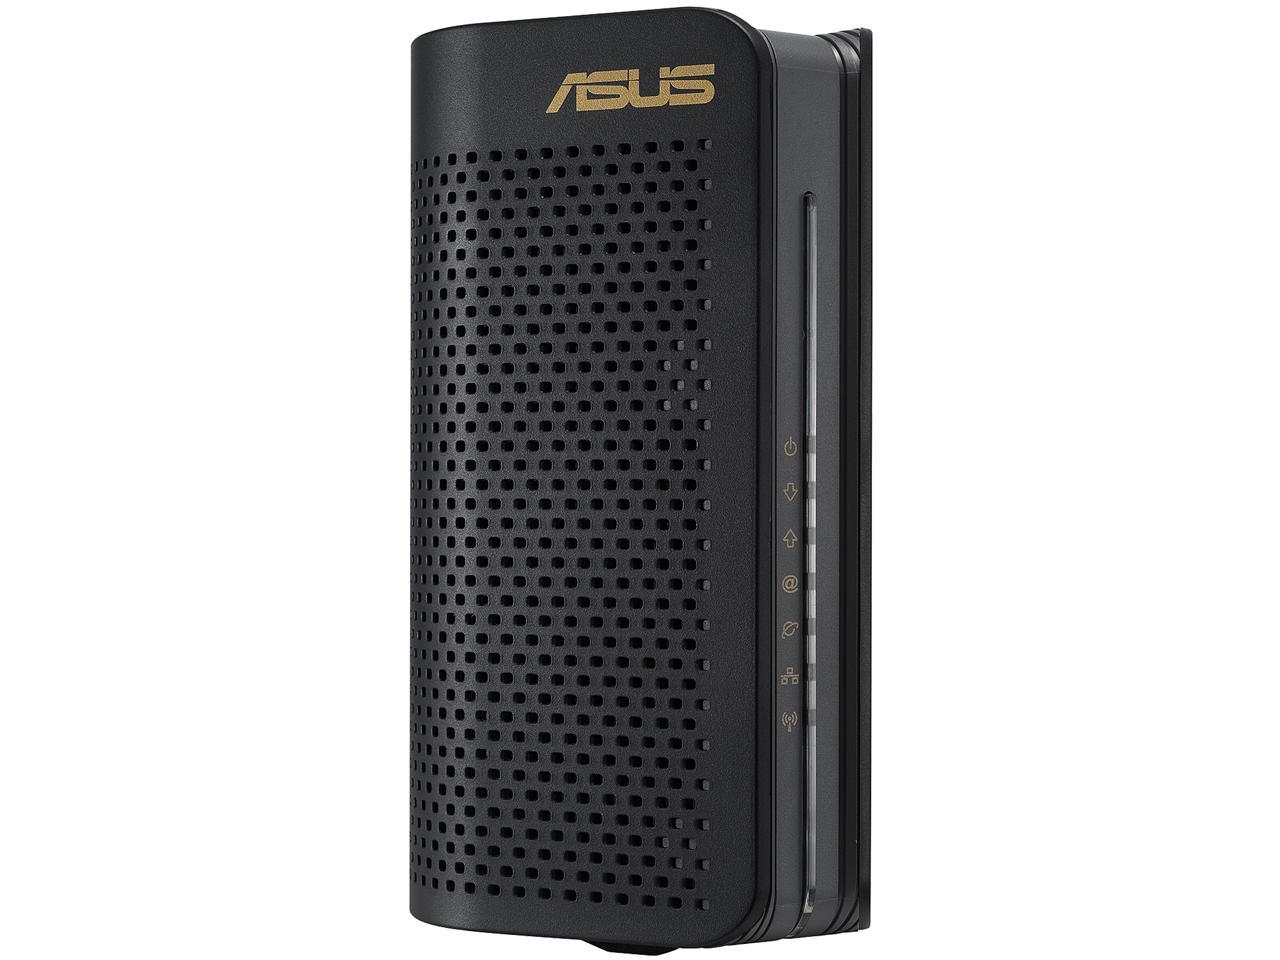 ASUS AX6000 WiFi 6 Cable Modem Wireless Router Combo (CM-AX6000) - Dual Band, DOCSIS 3.1, Gigabit Internet Support, Approved by Comcast Xfinity and Spectrum, 160MHz Bandwidth, 4K Video Playback, OFDMA